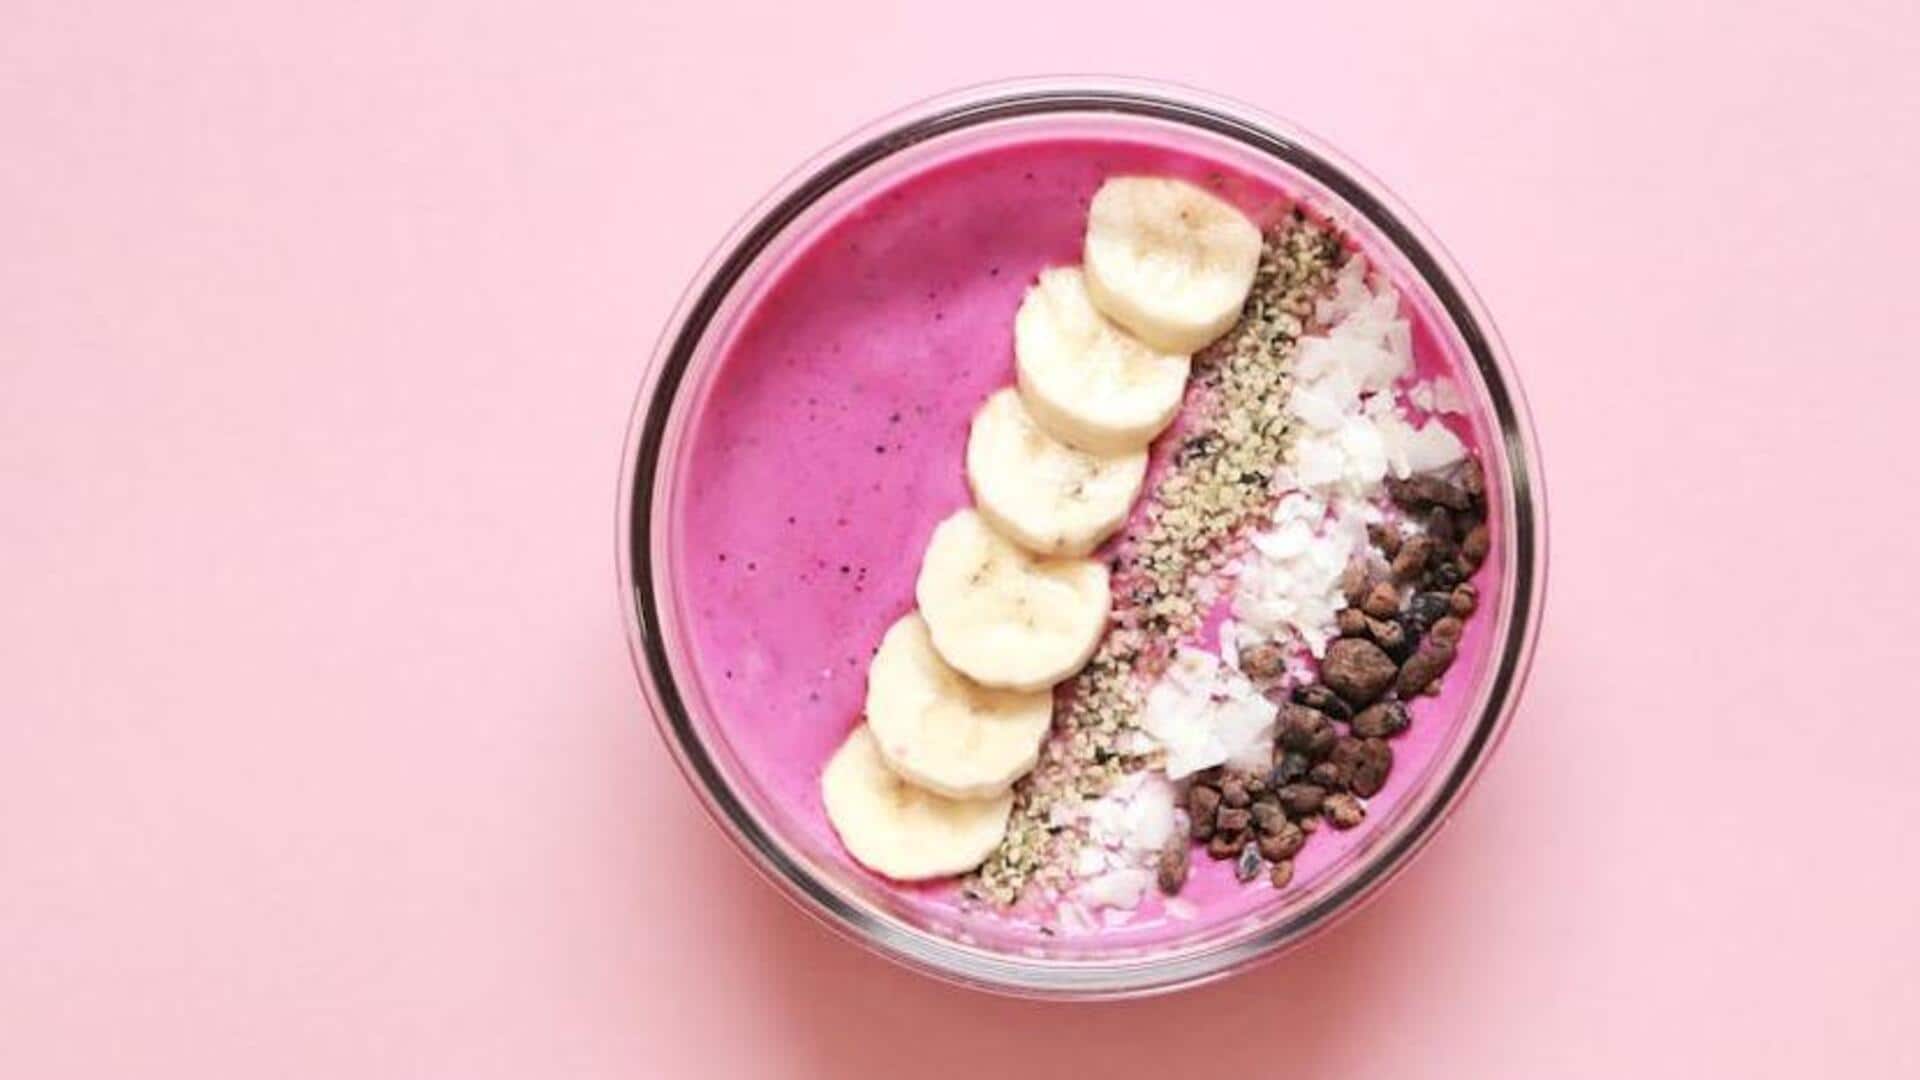 Savor these acai berry-based dishes for good health